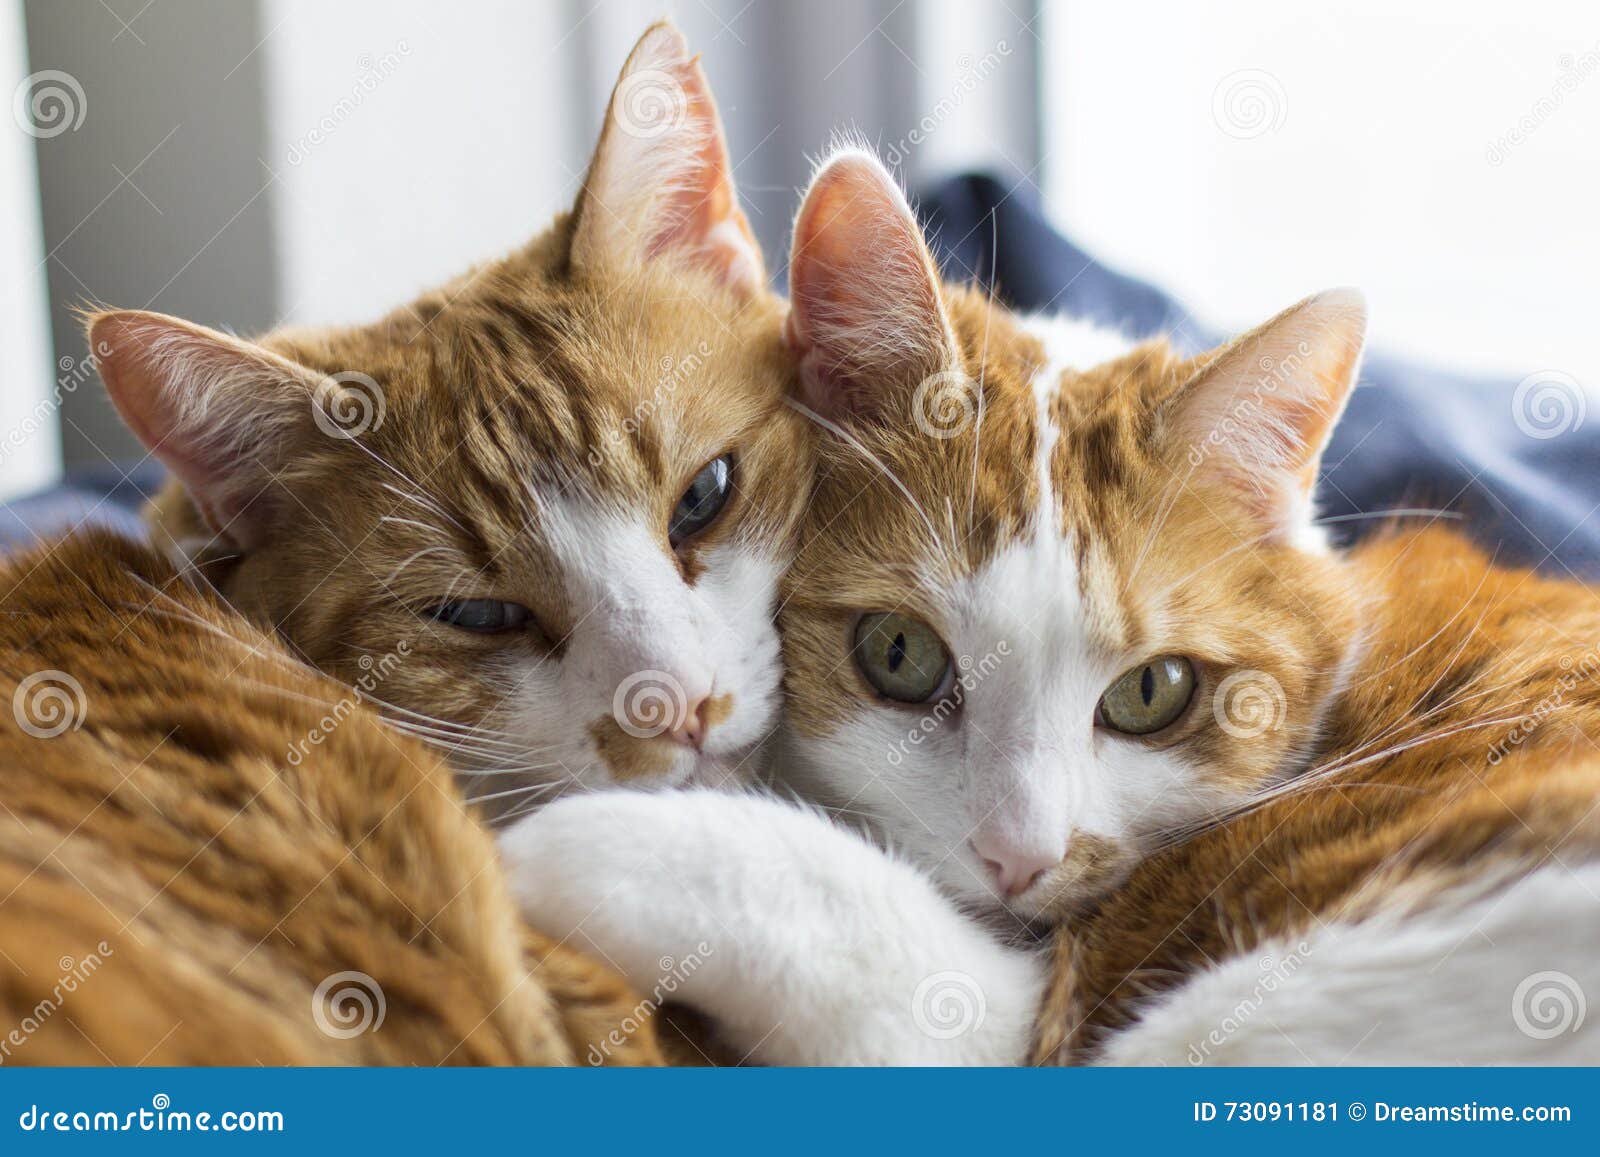 Two cute cats cuddling stock image. Image of cuddling - 73091181